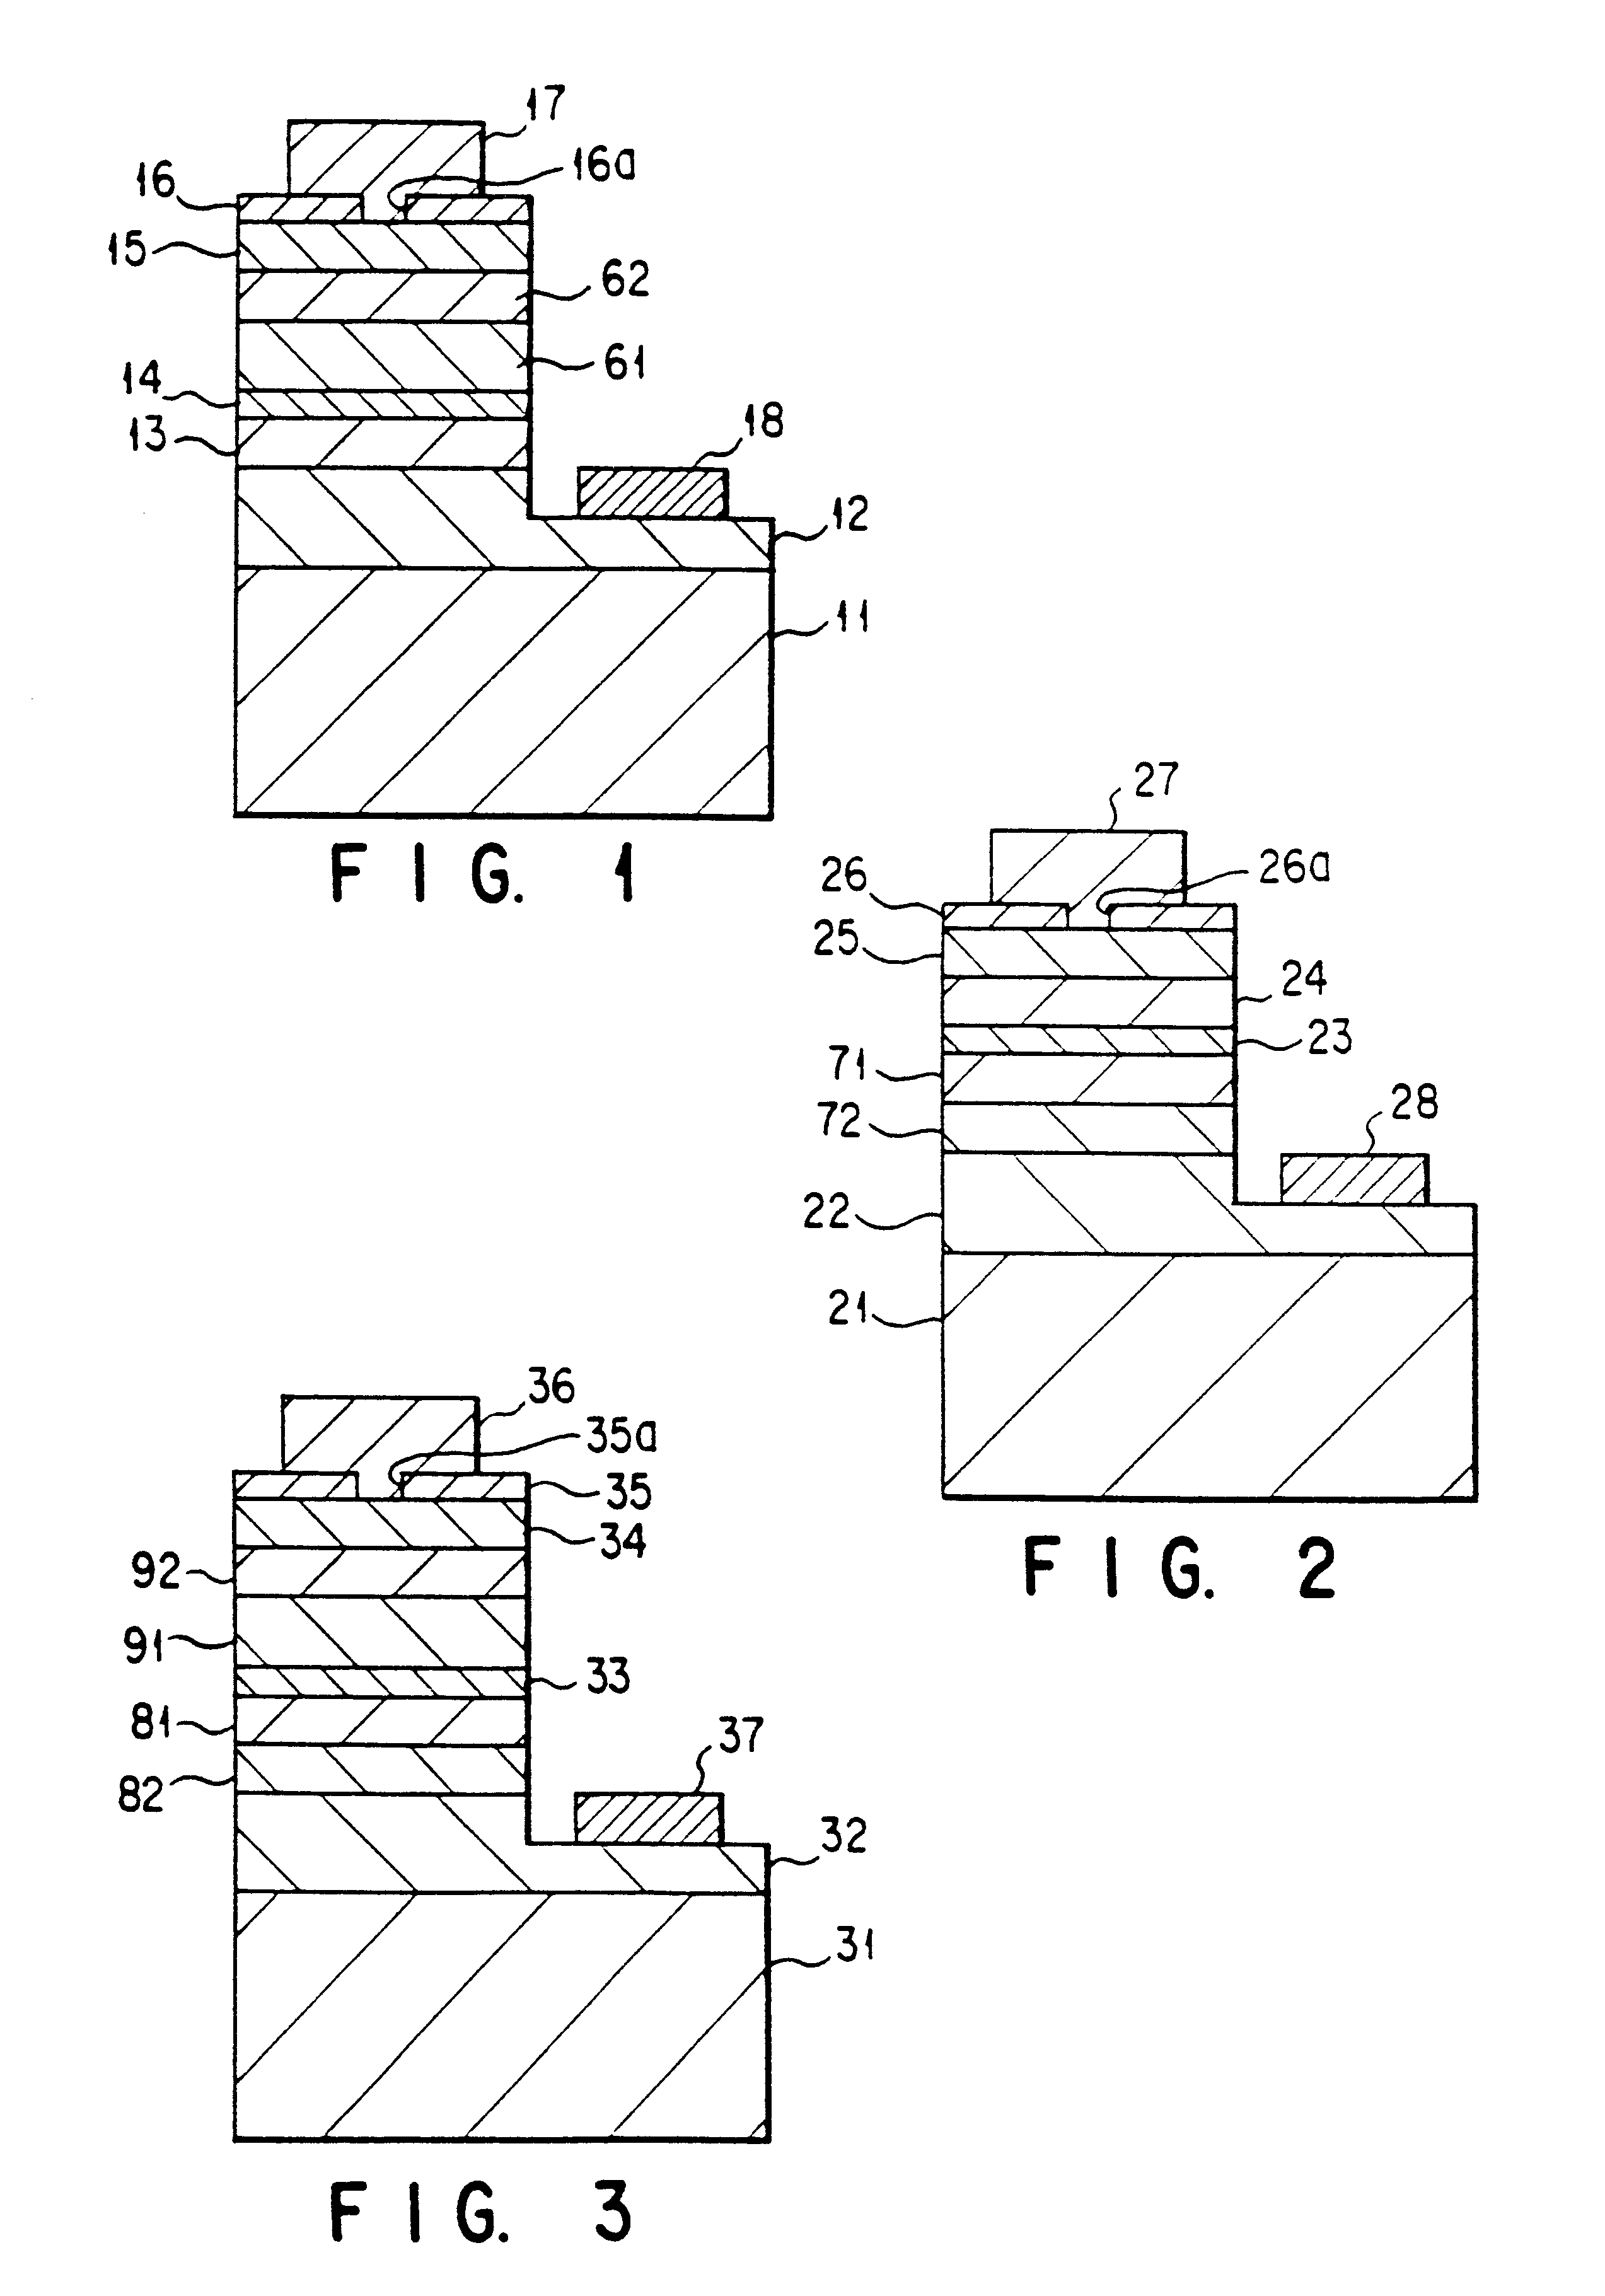 Nitride semiconductor light-emitting devices